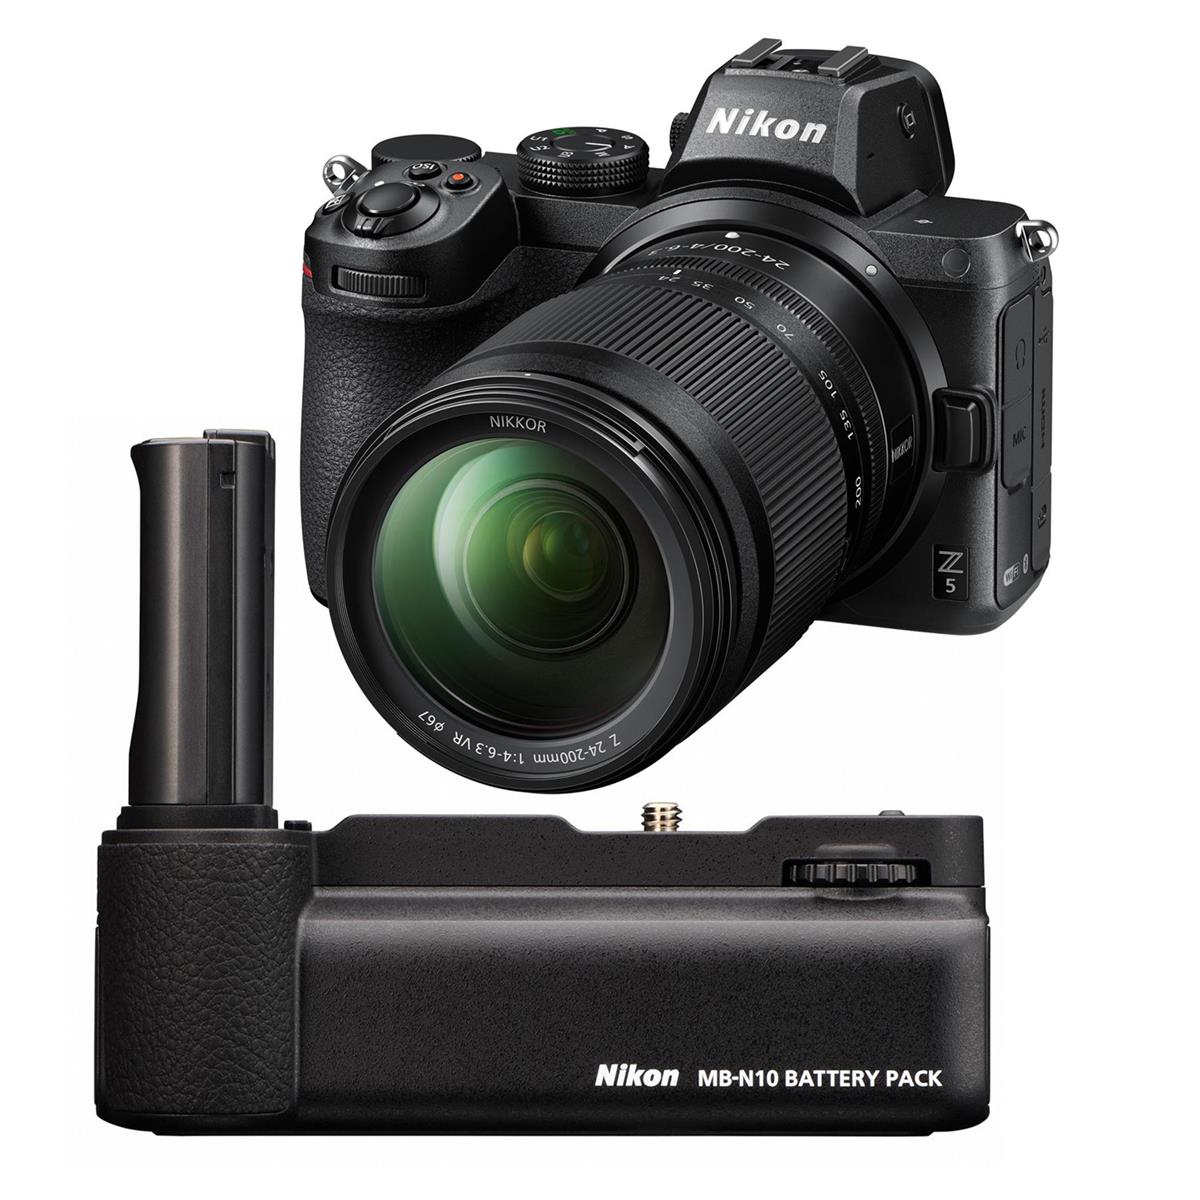 Nikon Z5 Mirrorless Camera with 24-200mm Lens with MB-N10 Battery Pack